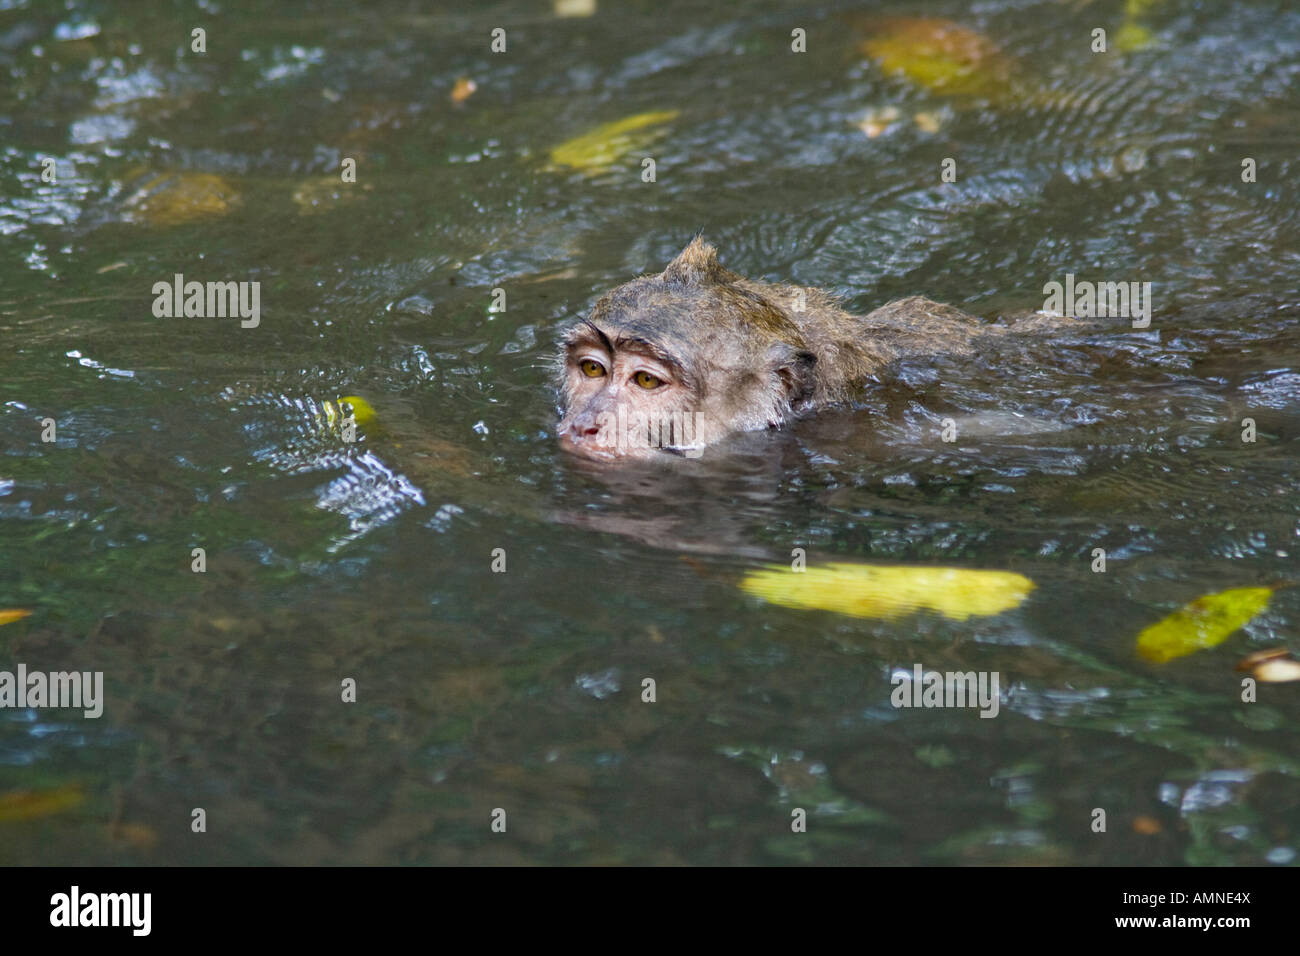 Swimming in Water Long Tailed Macaques Macaca Fascicularis Monkey Forest Ubud Bali Indonesia Stock Photo